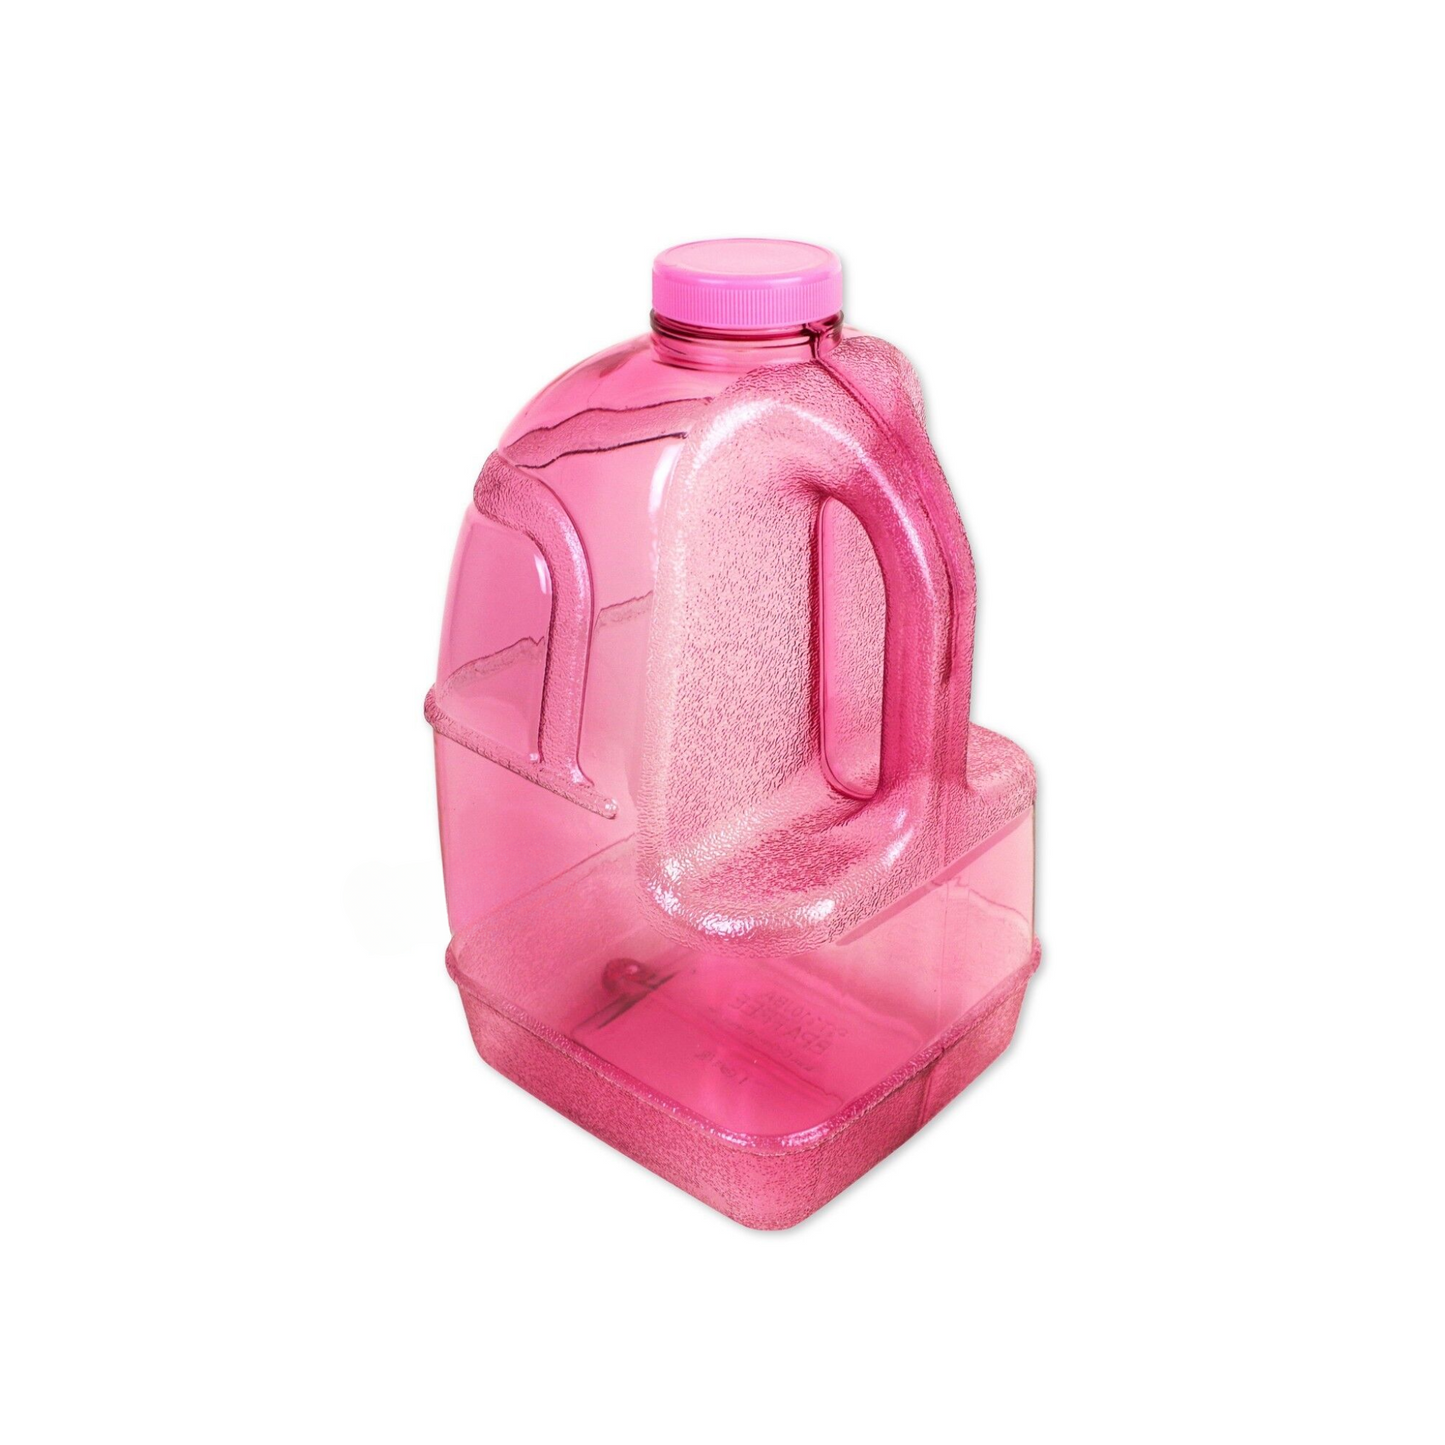 BPA-free pink plastic water jug with a 1-gallon capacity for home or office use